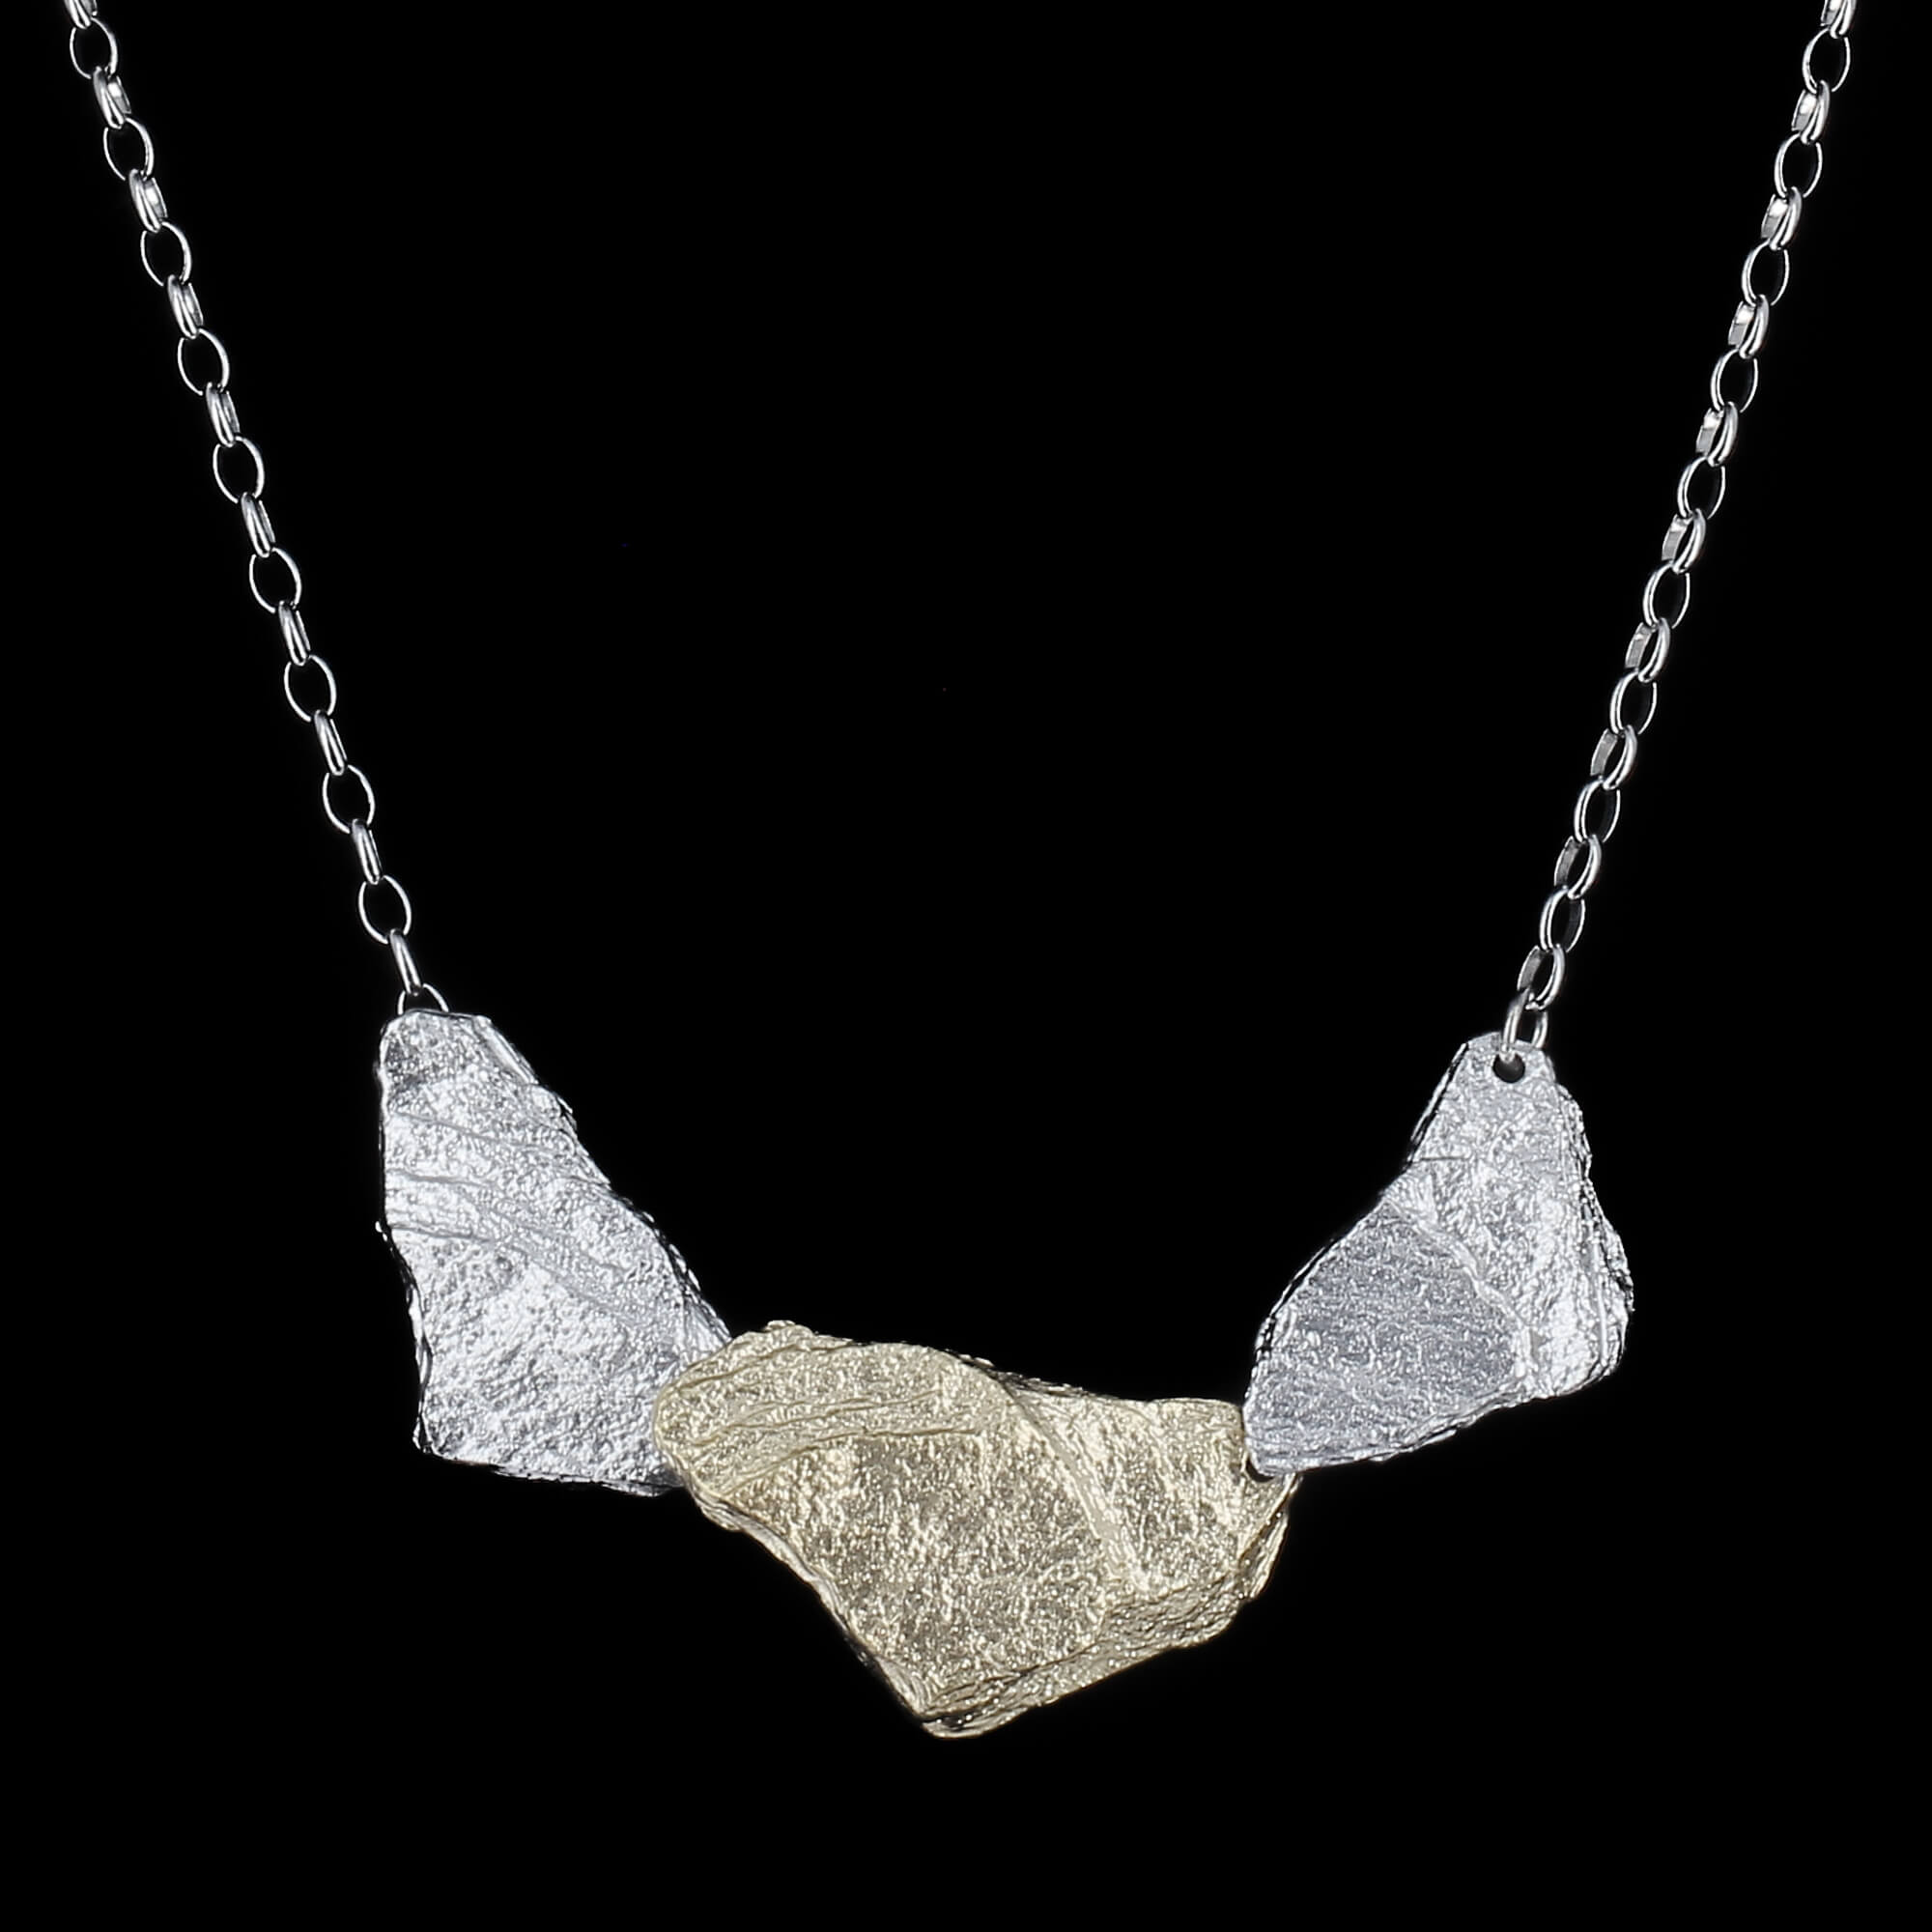 Two silver-colored stone shaped pendant with chain